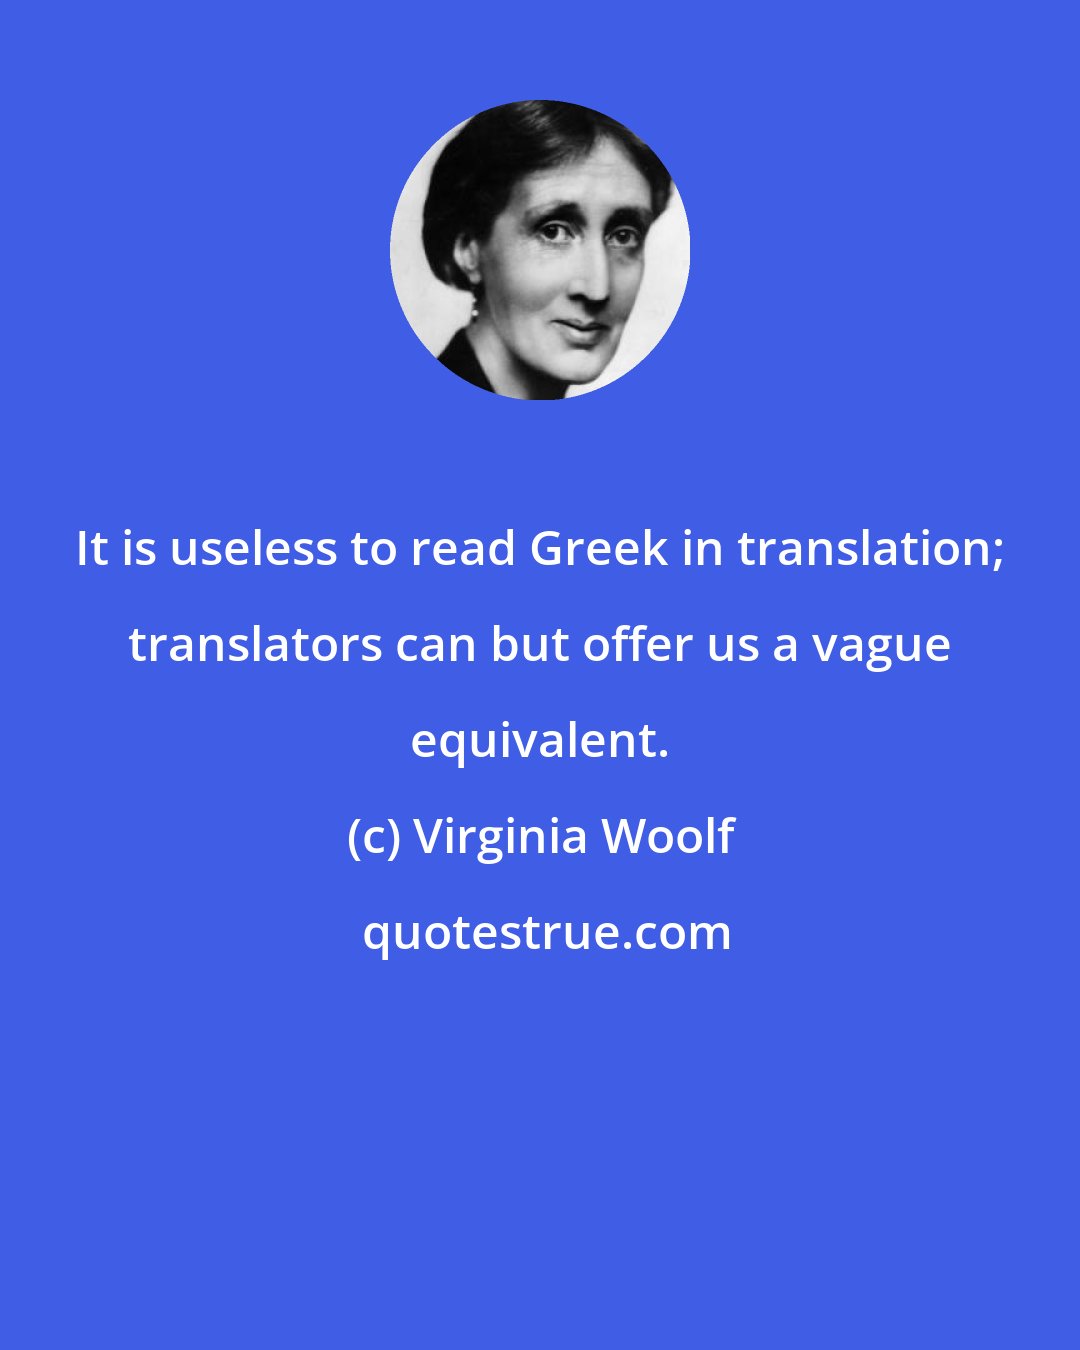 Virginia Woolf: It is useless to read Greek in translation; translators can but offer us a vague equivalent.